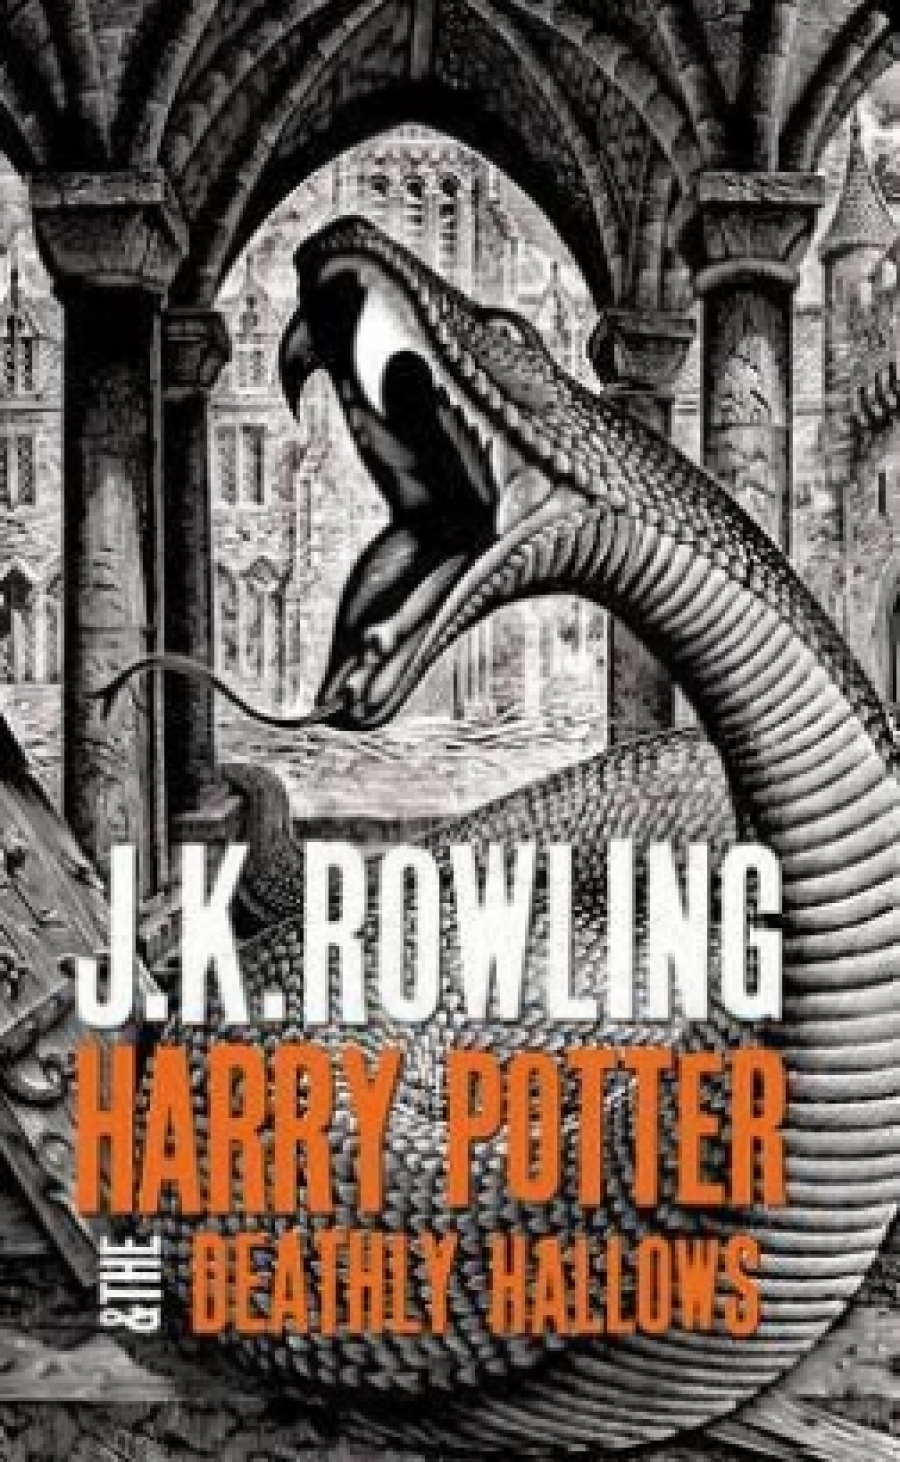 Rowling J.K. Harry Potter and the Deathly Hallows HB 